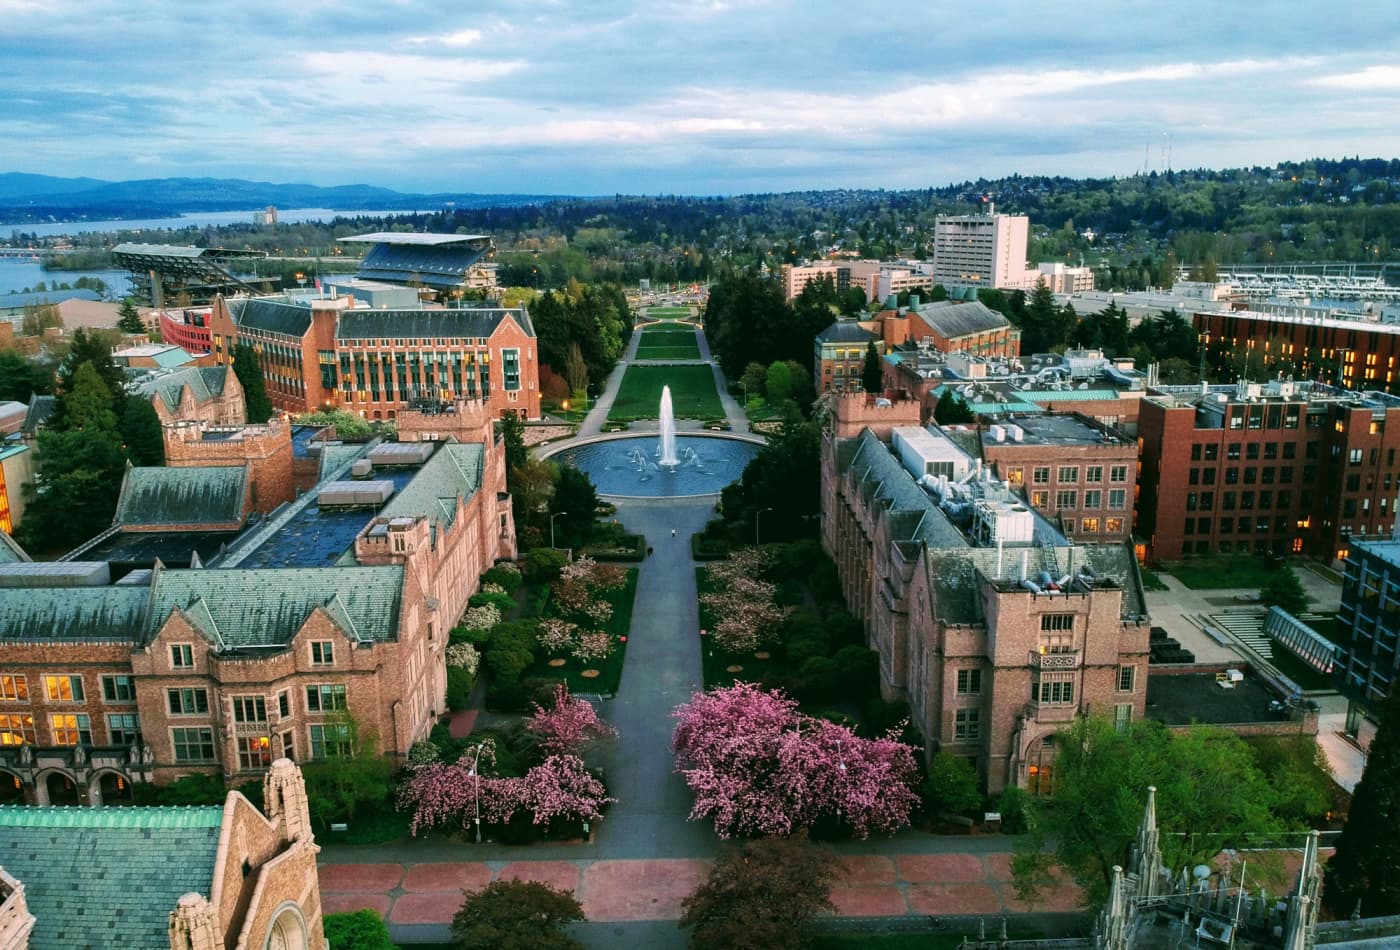 U.S. News These are the 10 best universities in the world